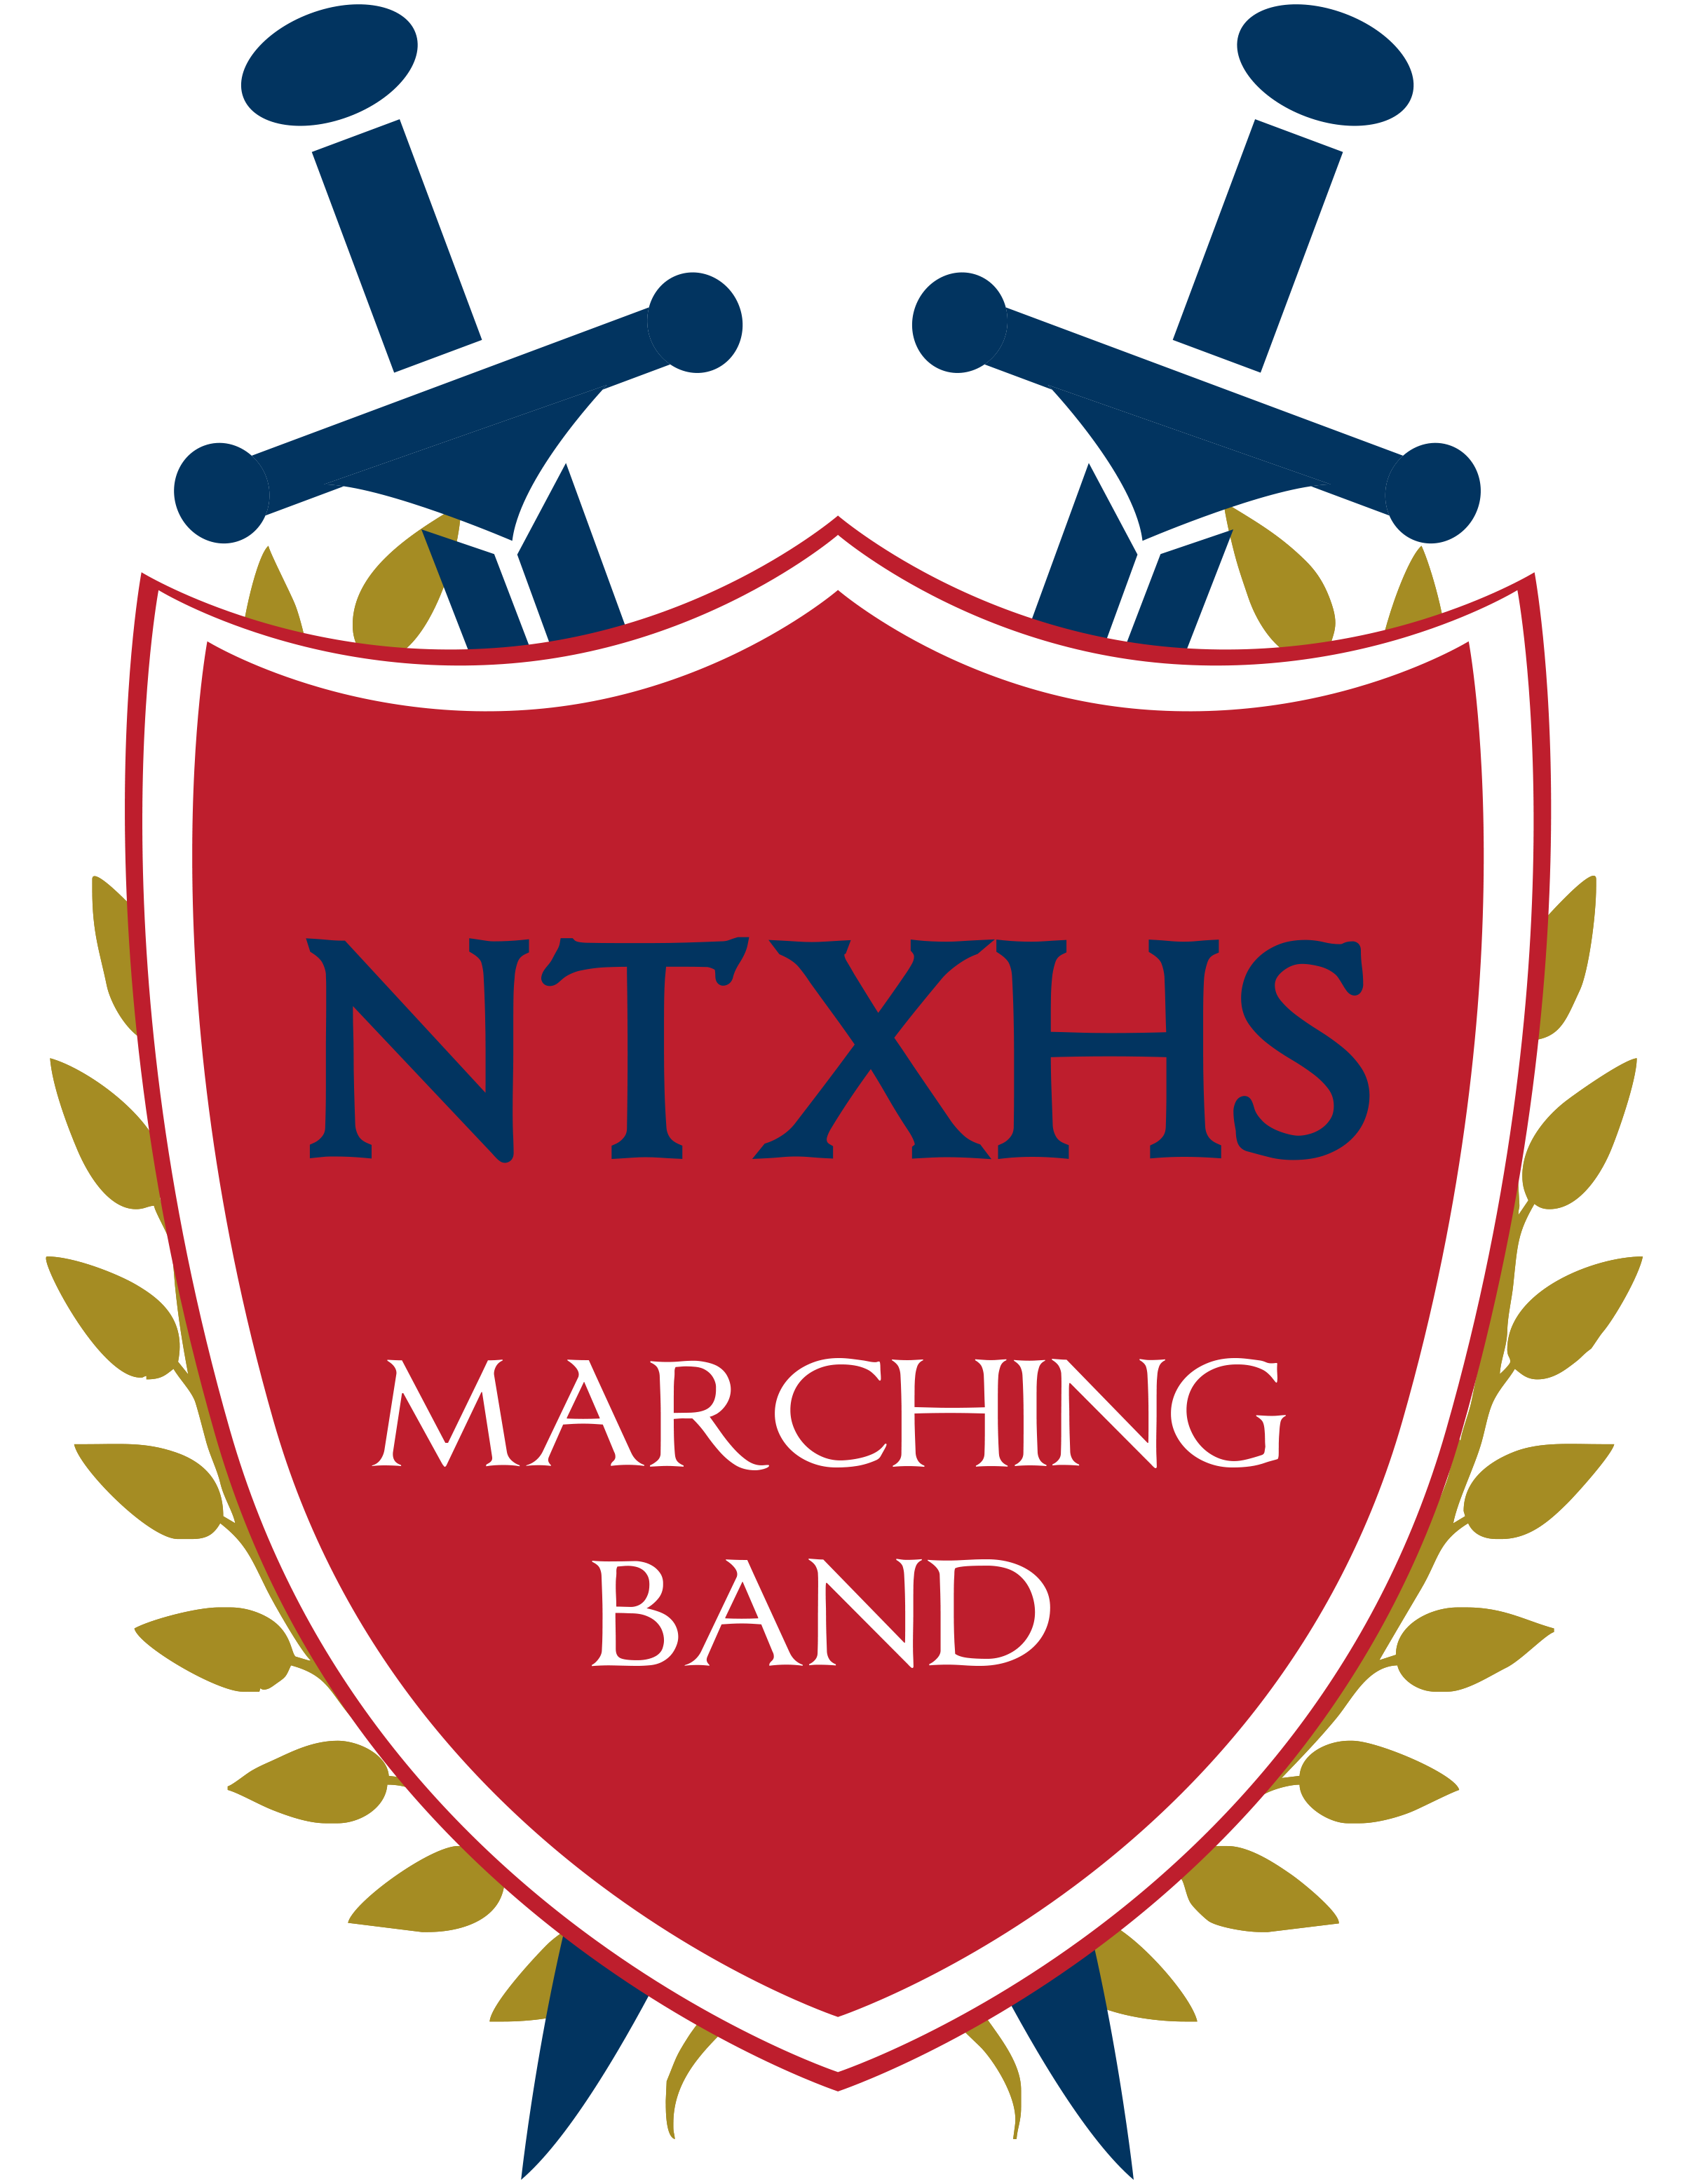 hats clipart marching band